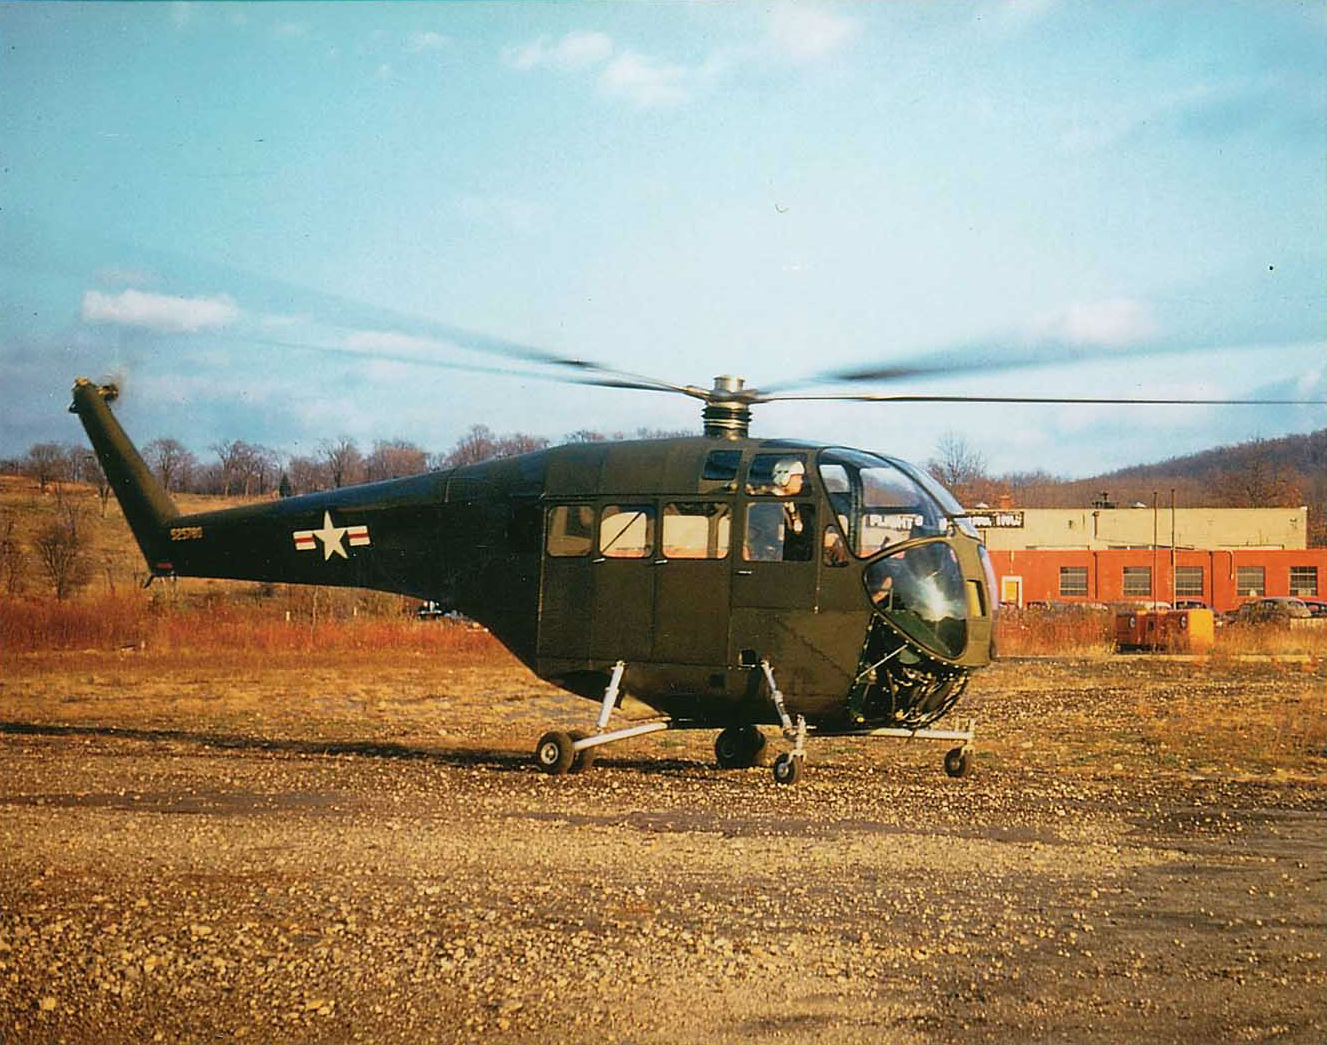 The second Doman LZ-5 helicopter for the U.S. Army running up at Danbury, Connecticut, during an early test flight. Jeff Evans Collection Photo